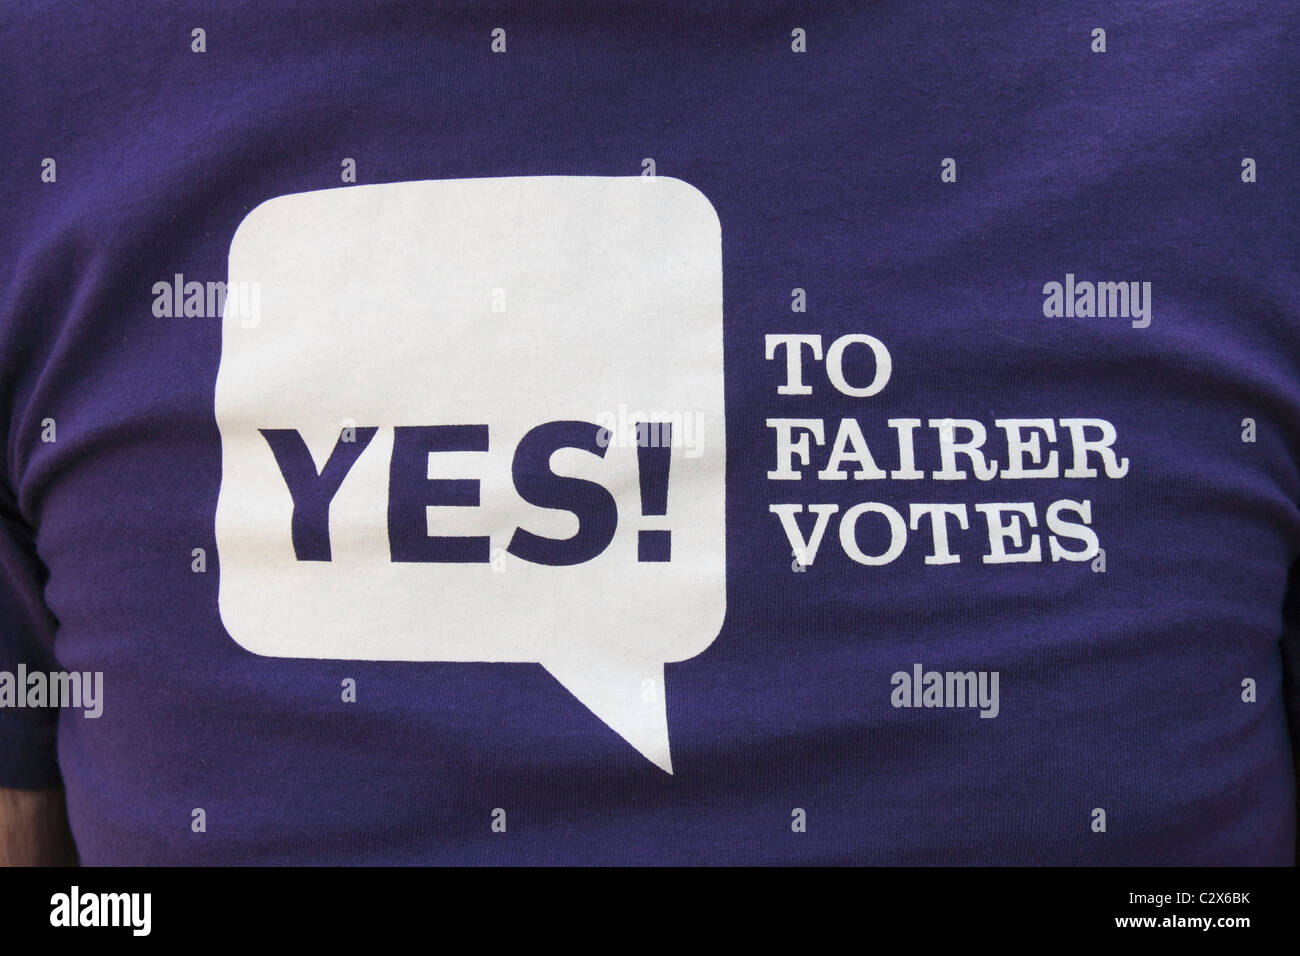 A t-shirt design promoting the 'Yes' vote for the Alternative Vote referendum in the UK on 5th May 2011. Stock Photo